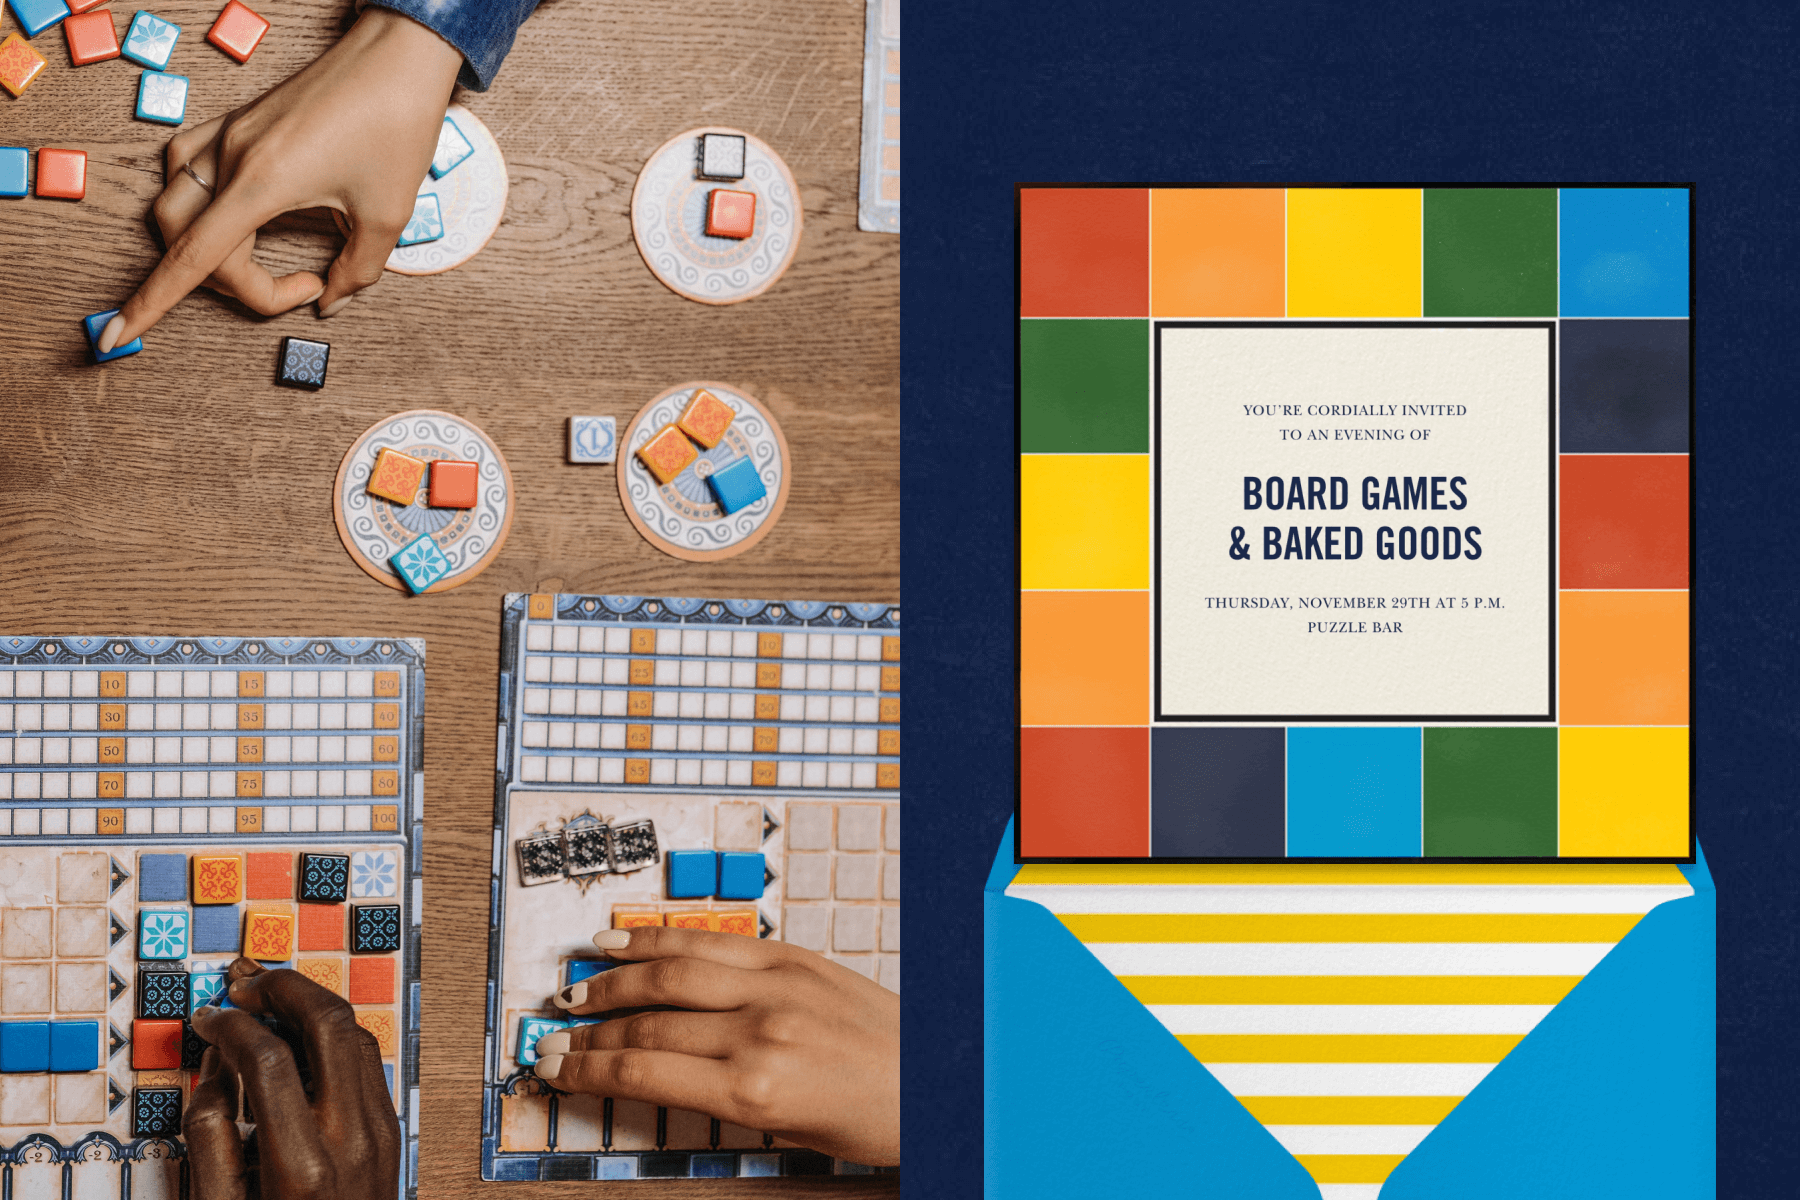 Left: The hands of three people playing a board game with colorful tiles. Right: A game night invitation with colorful squares around the border and a blue envelope with yellow stripes in the lining.